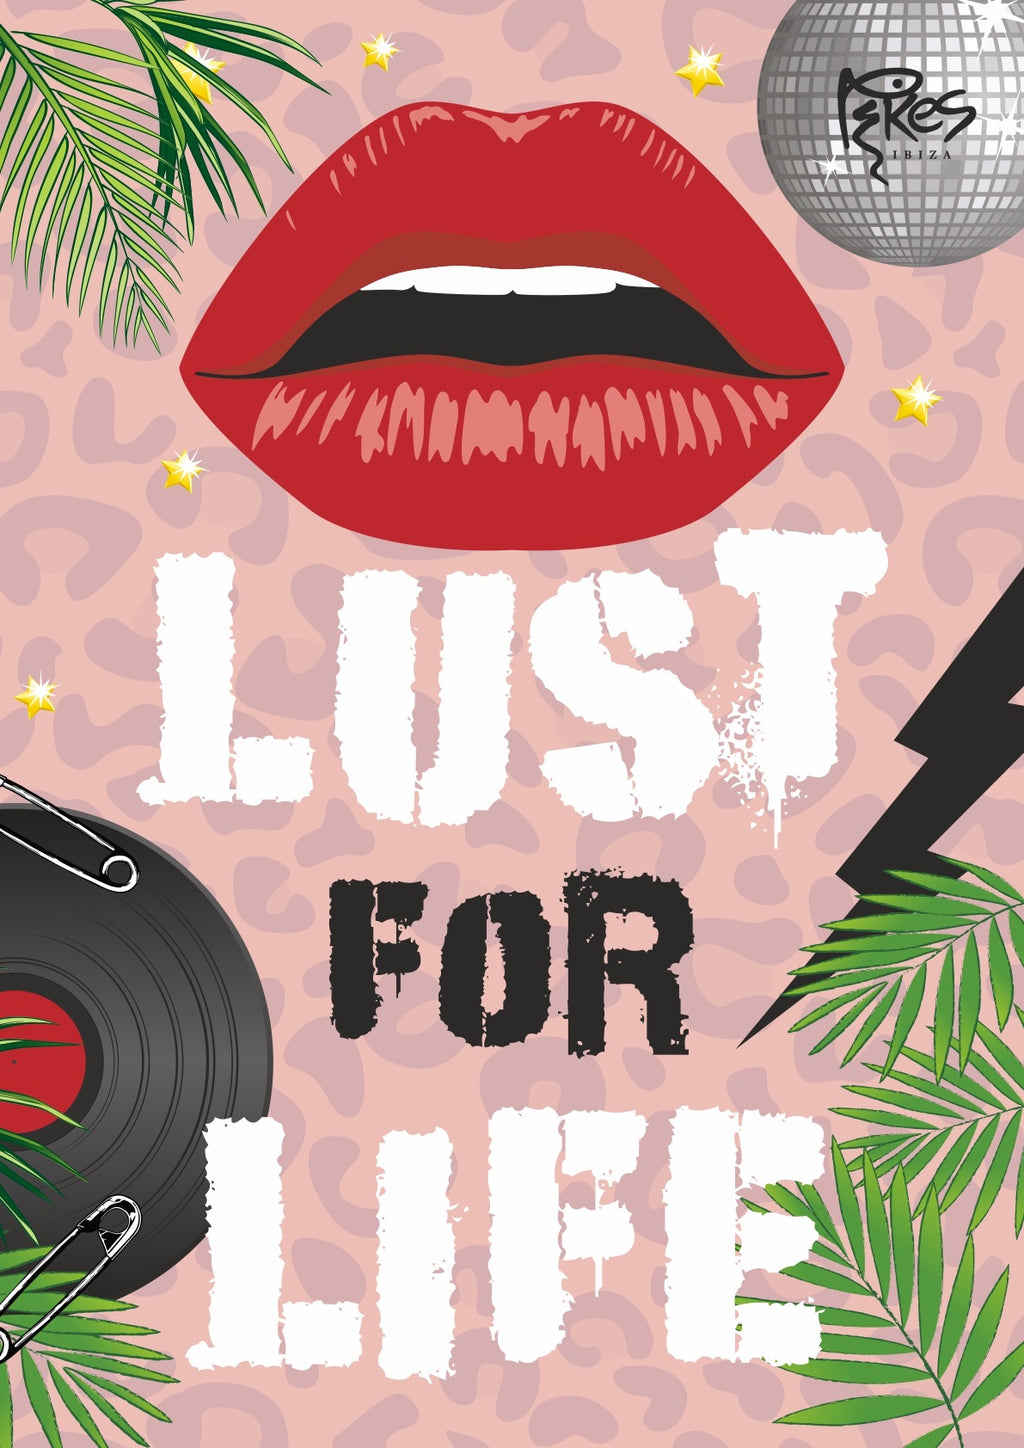 Starlover x Pikes ‘Lust For Life’ Print